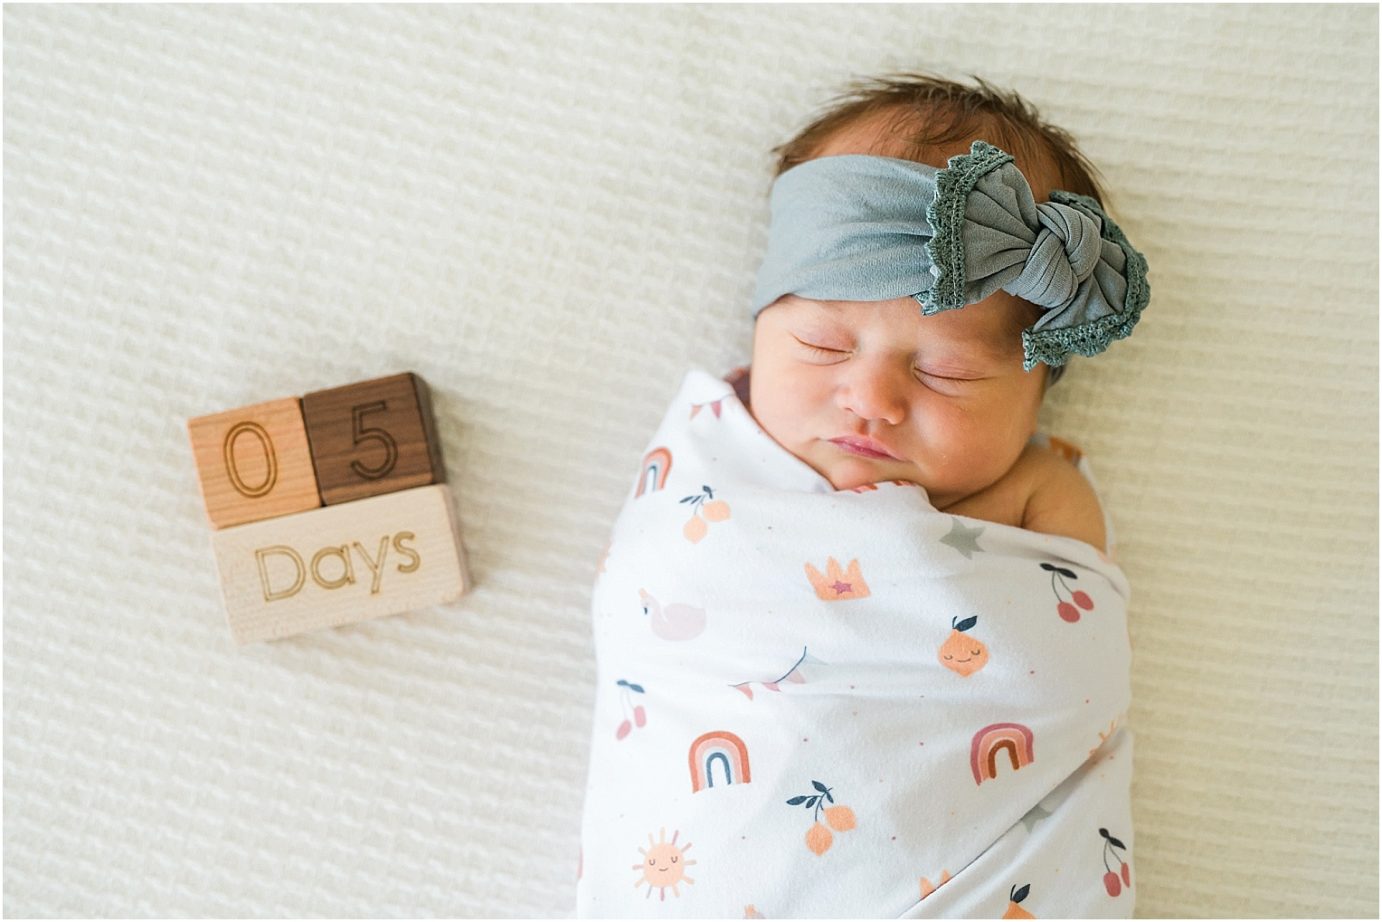 Lifestyle Newborn Session Noa with numbered days